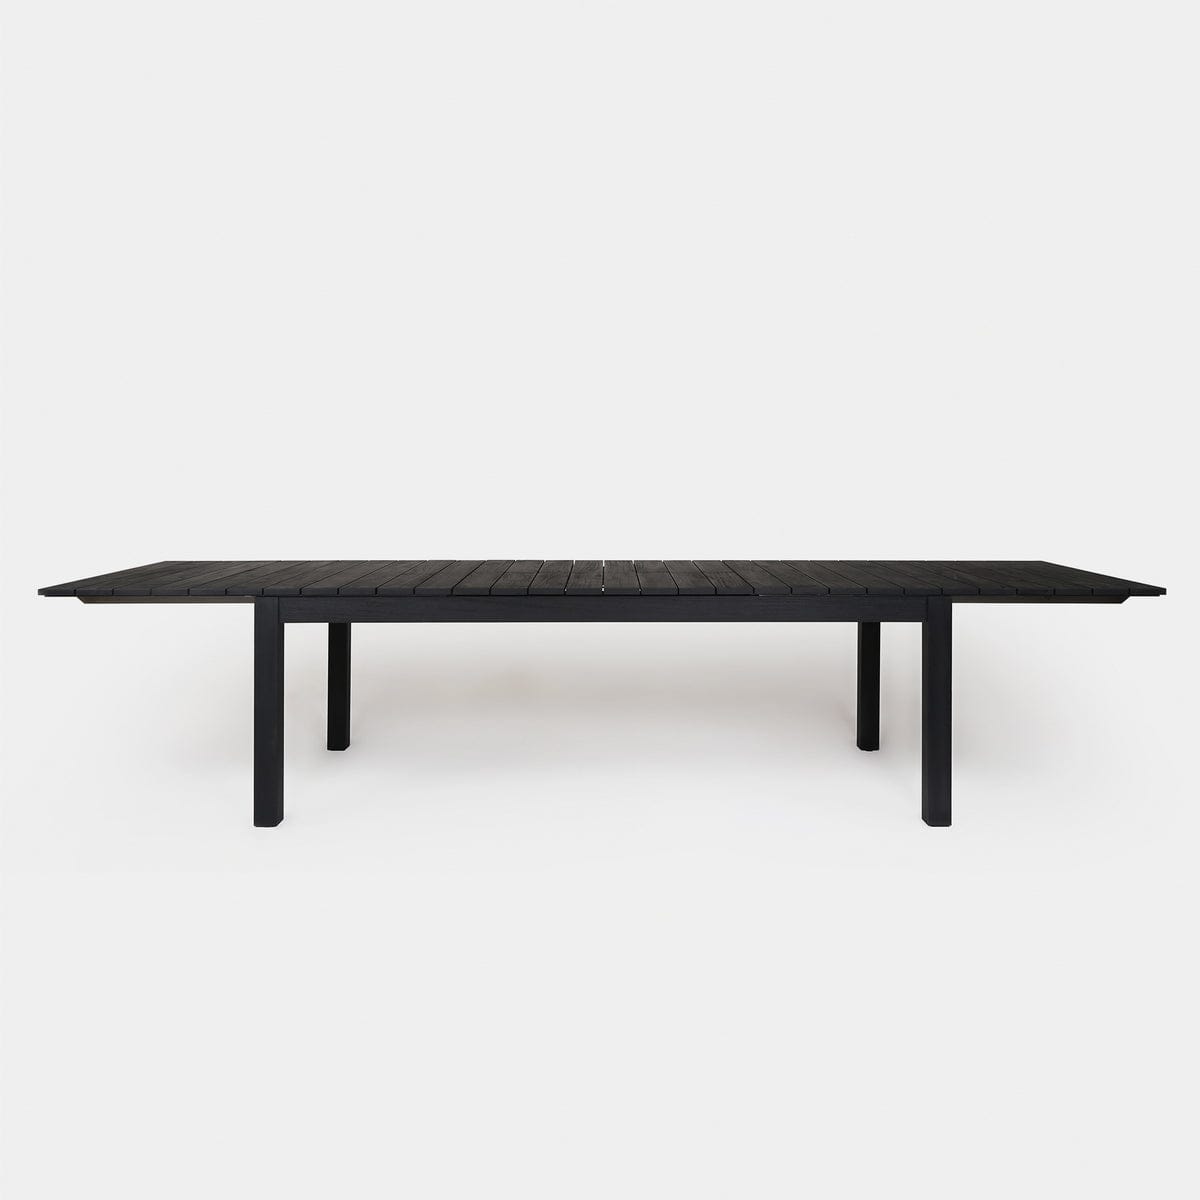 Pacific Extendable Dining Table. aluminum frame, teak charcoal top